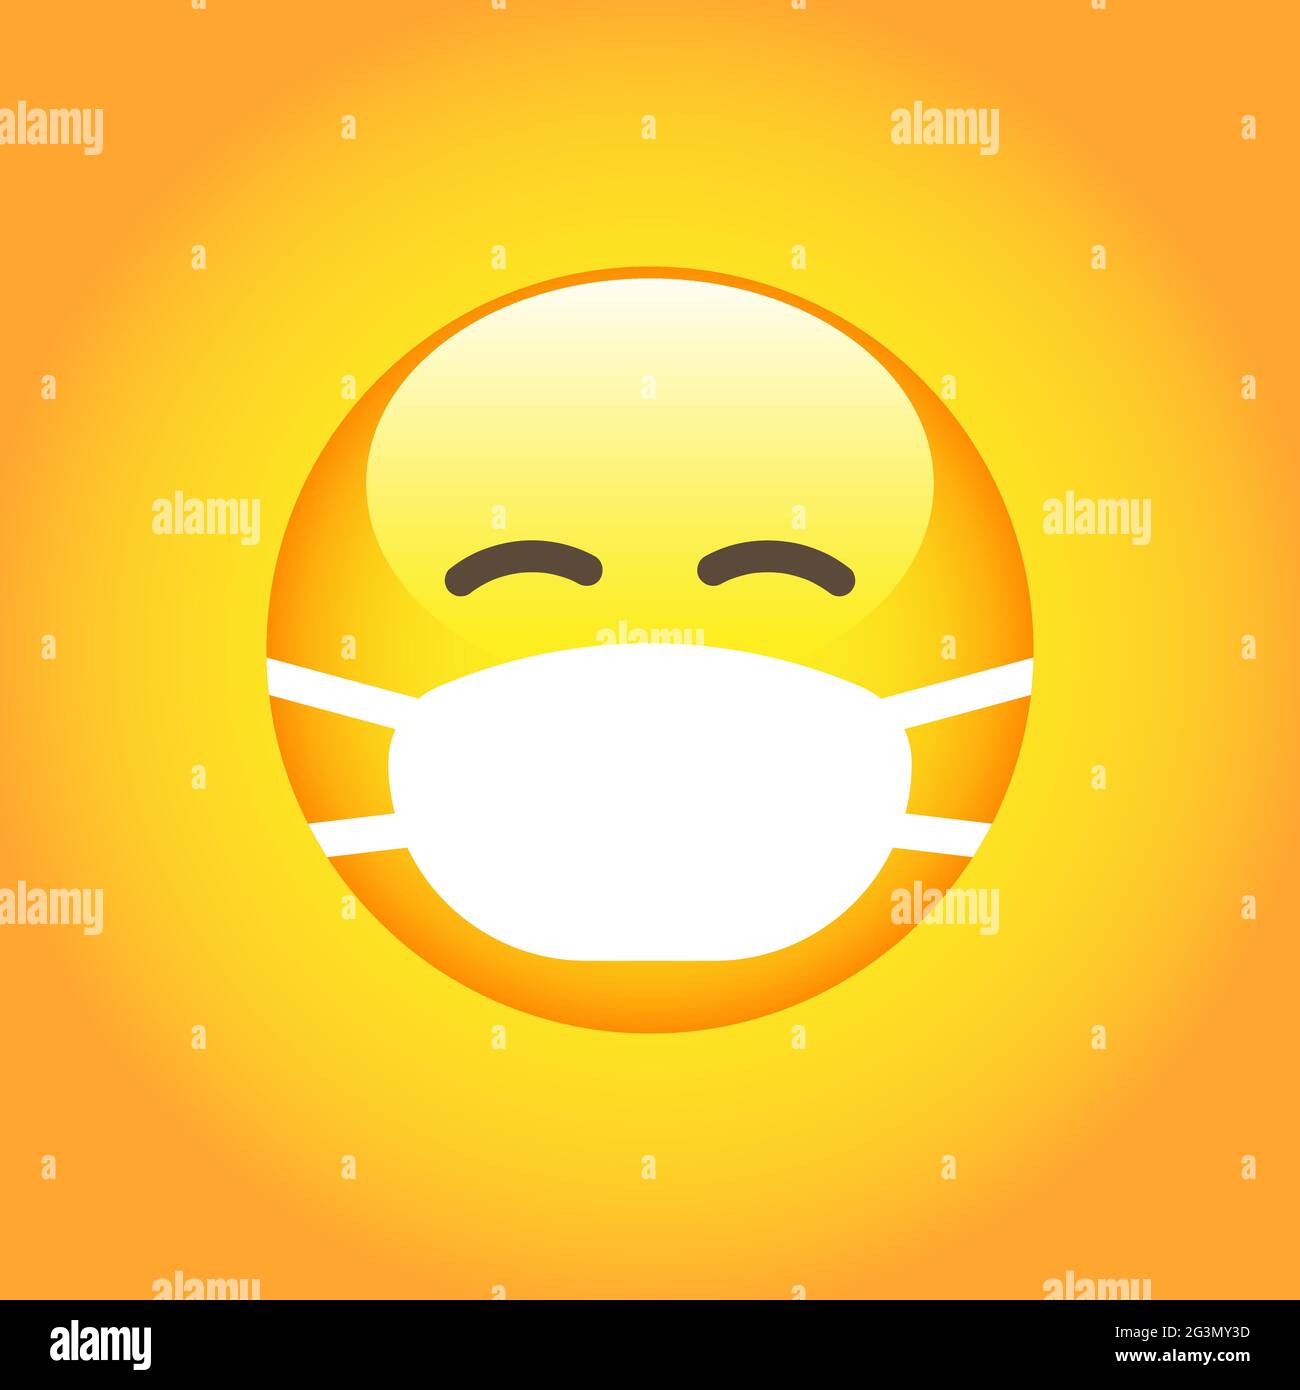 Emoji with white mouth mask - yellow face with eyes closed wearing a white surgical mask Stock Vector